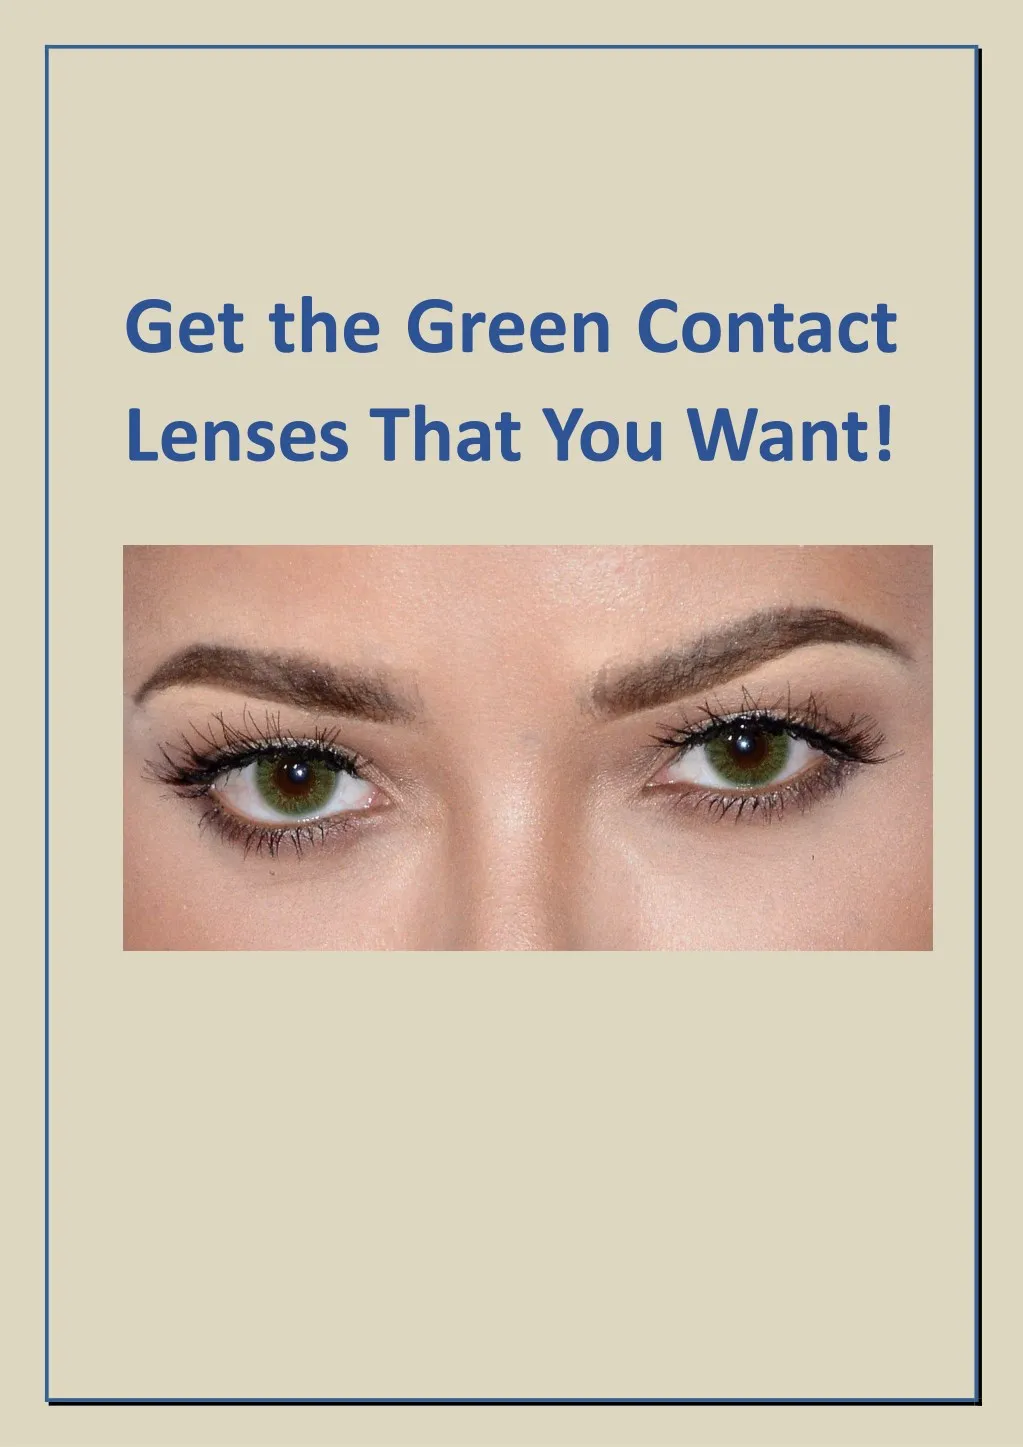 get the green contact lenses that you want